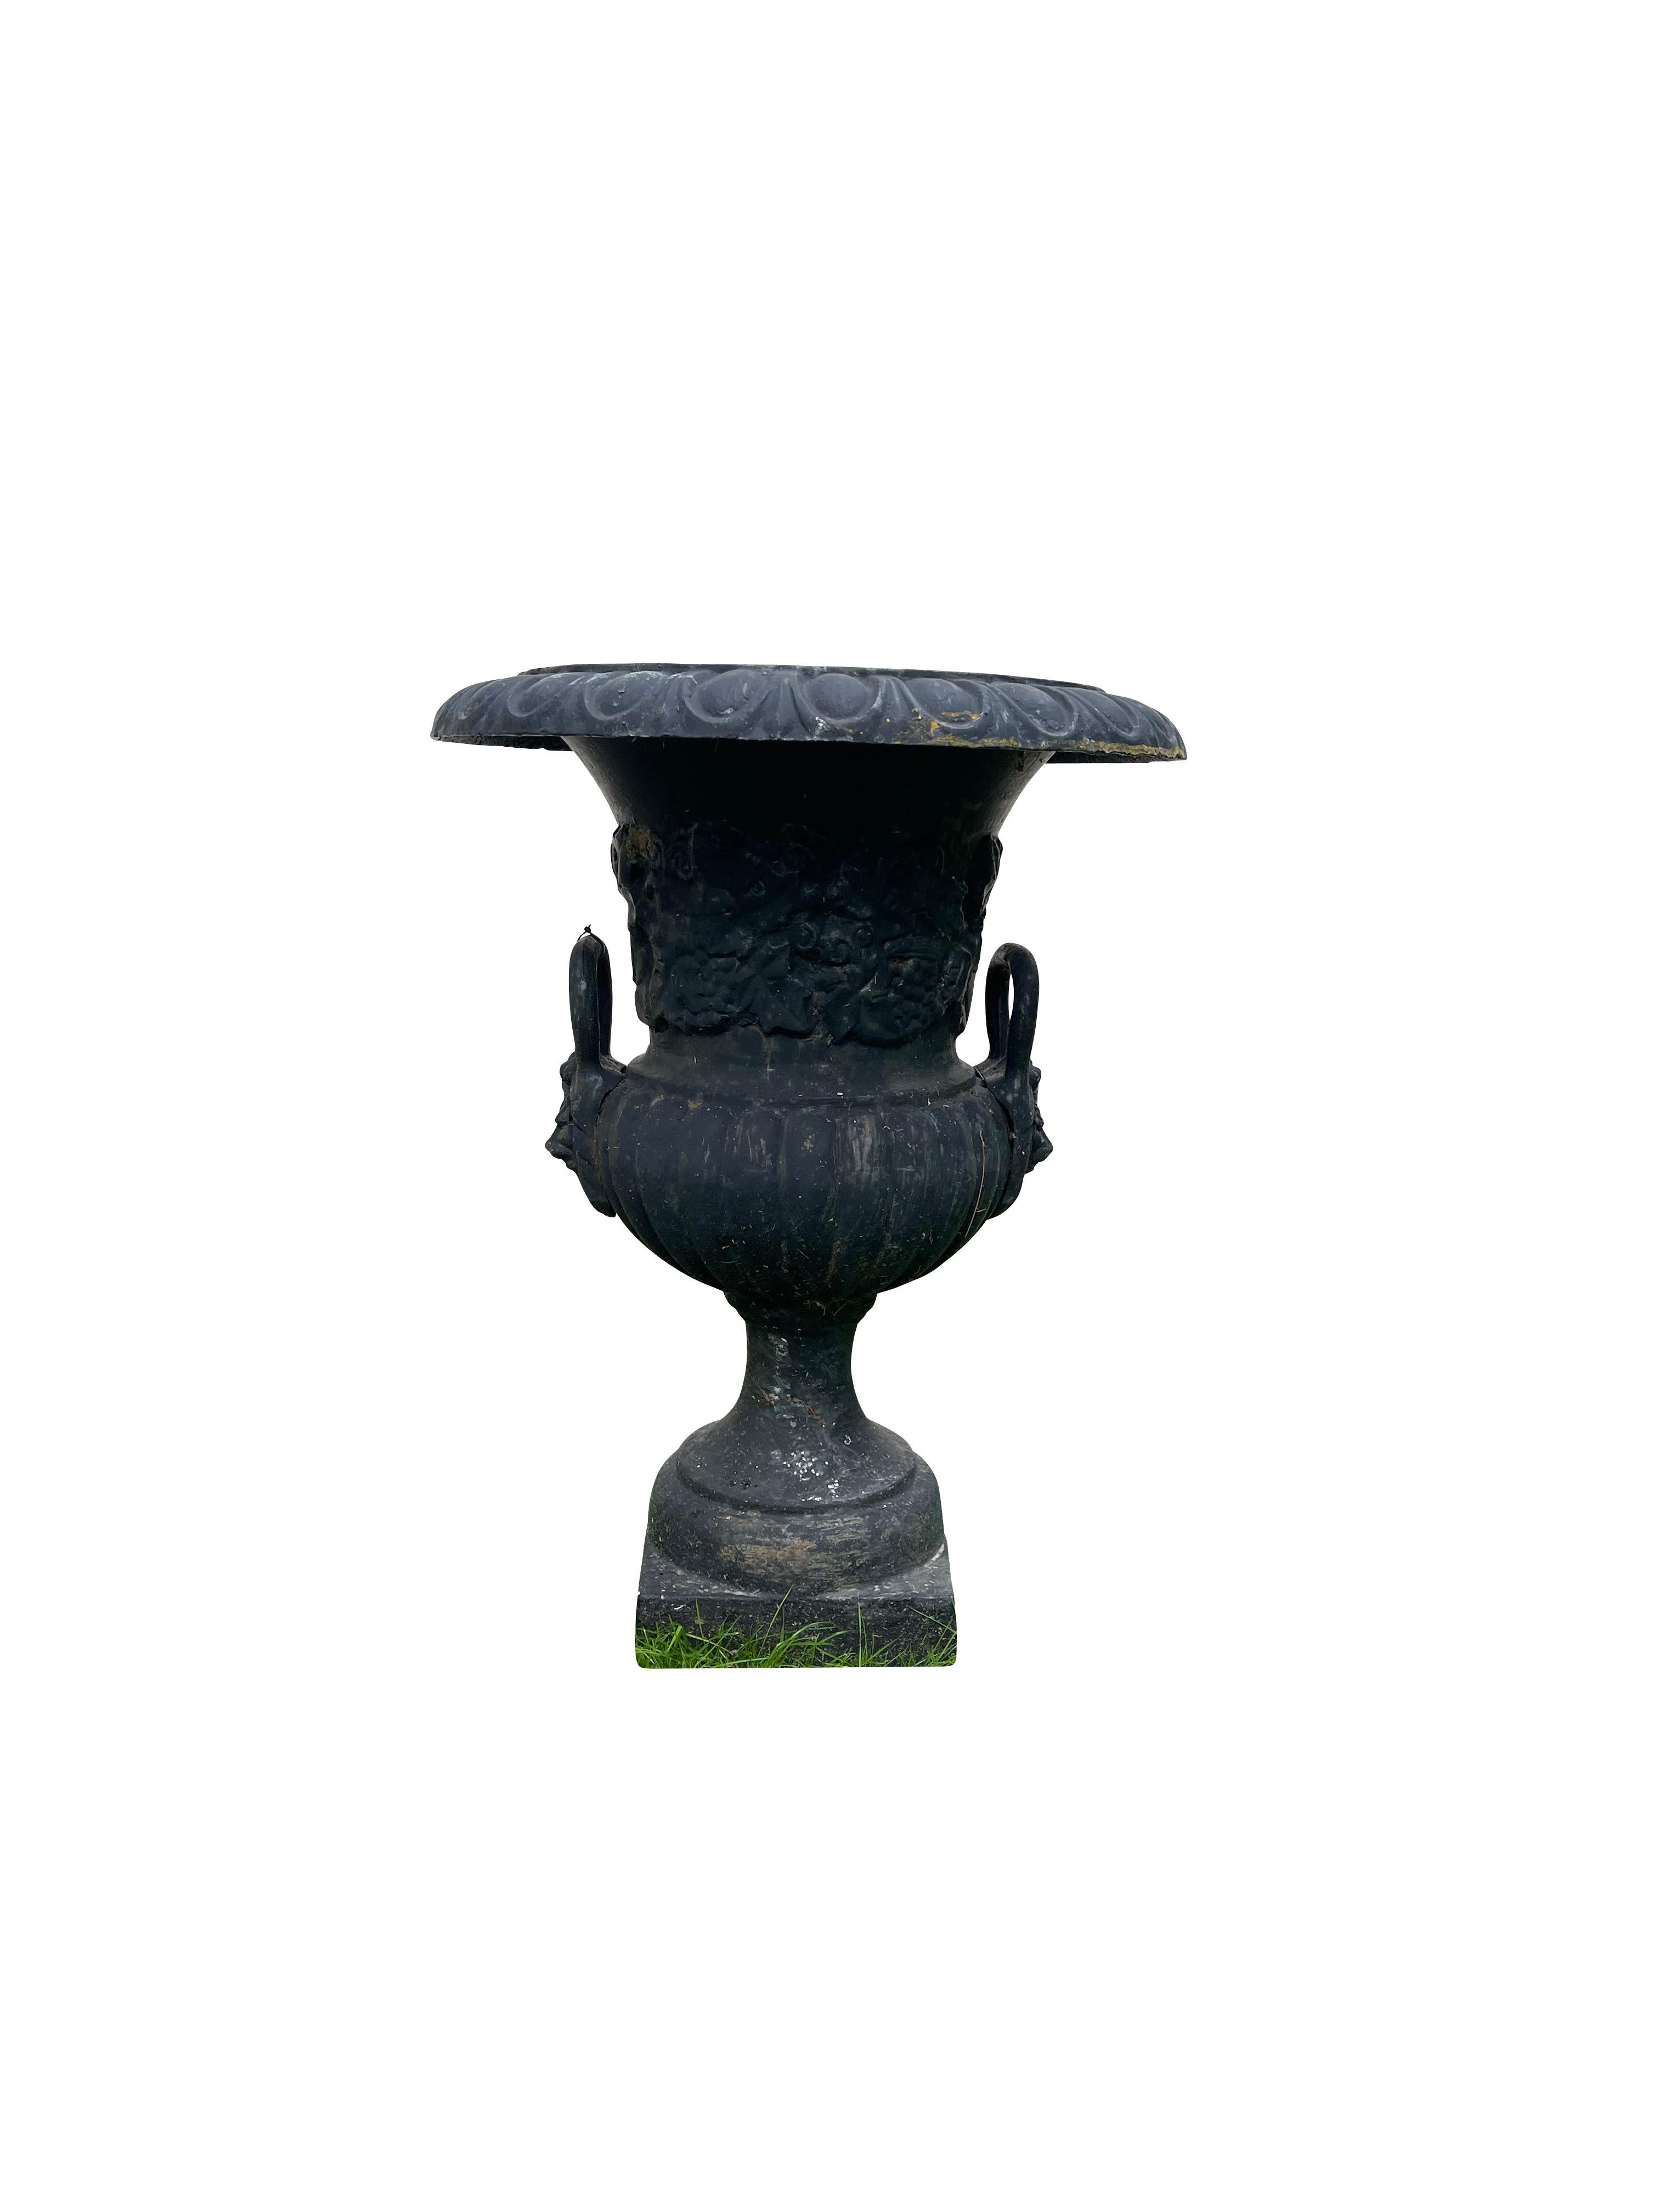 Pair of handled cast iron Campana garden urns, in black. Each one is raised on a -Inch square base with a 6-Inch deep and 14-Inch interior diameter, one drain hole; the rim is decorated with egg and dart ornamentation and the handles are formed with